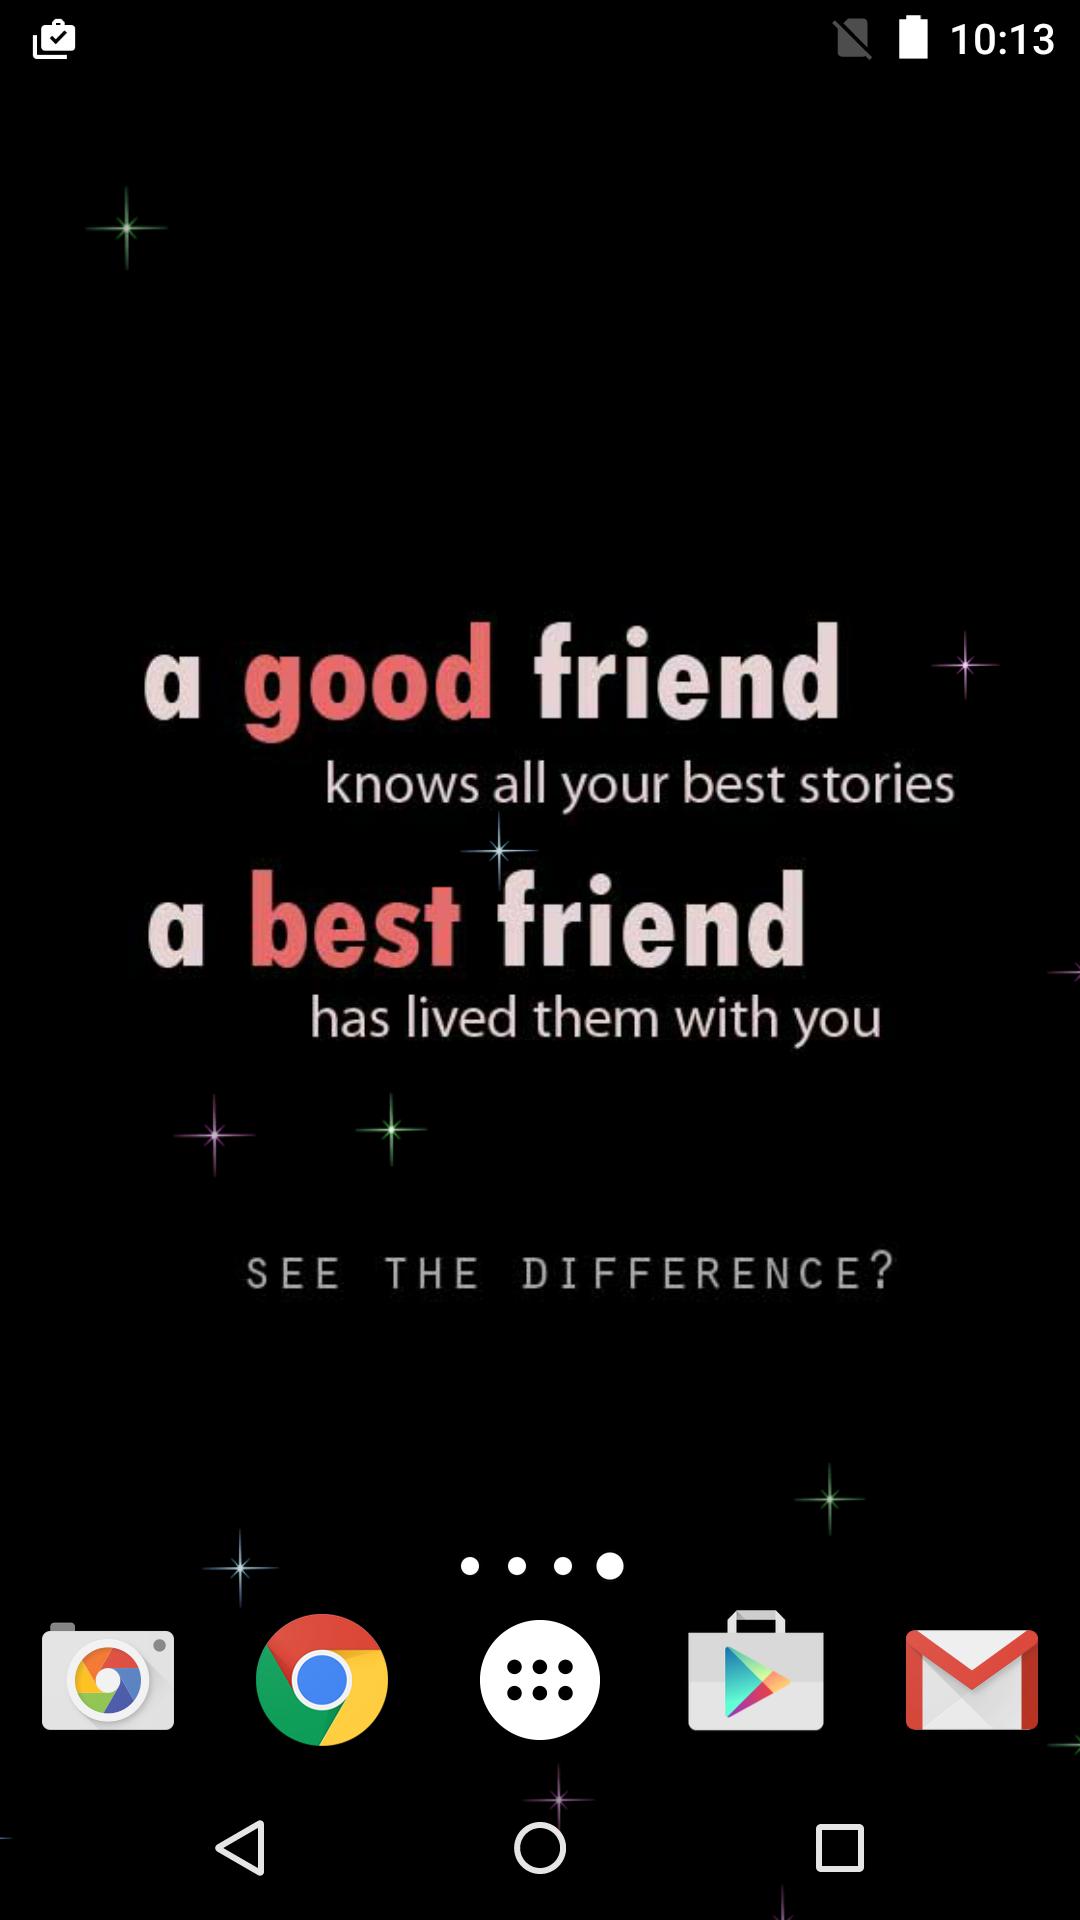 friendship quotes wallpapers hd